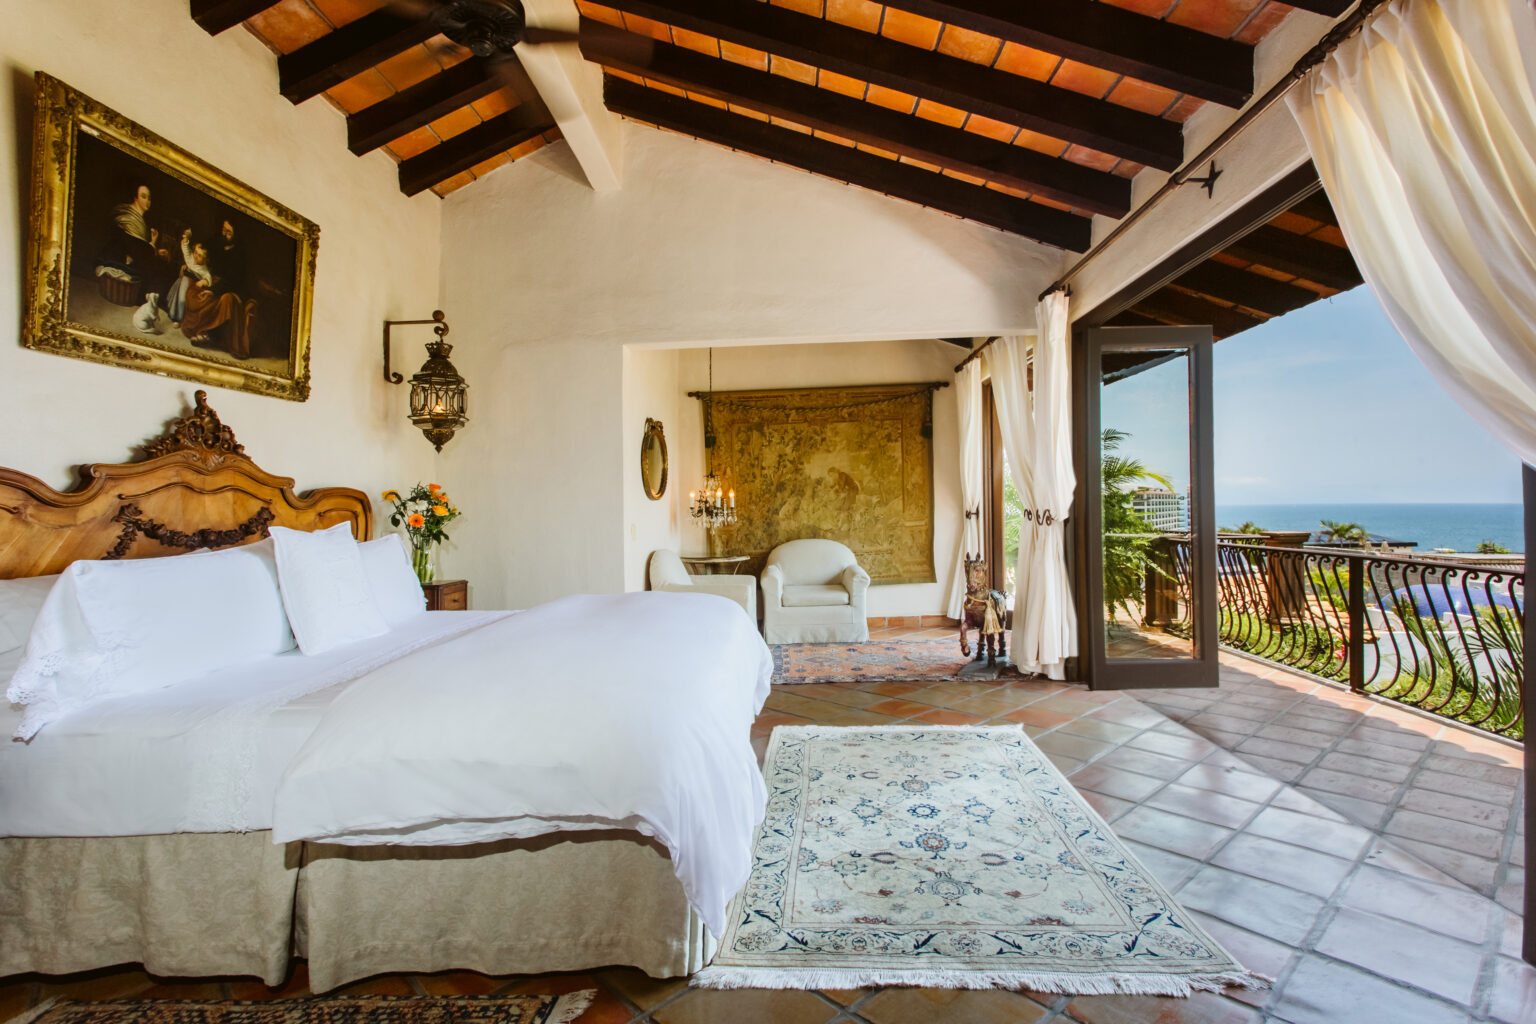 Angel's View Suite bed, reading nook and terrace with view of Banderas Bay.